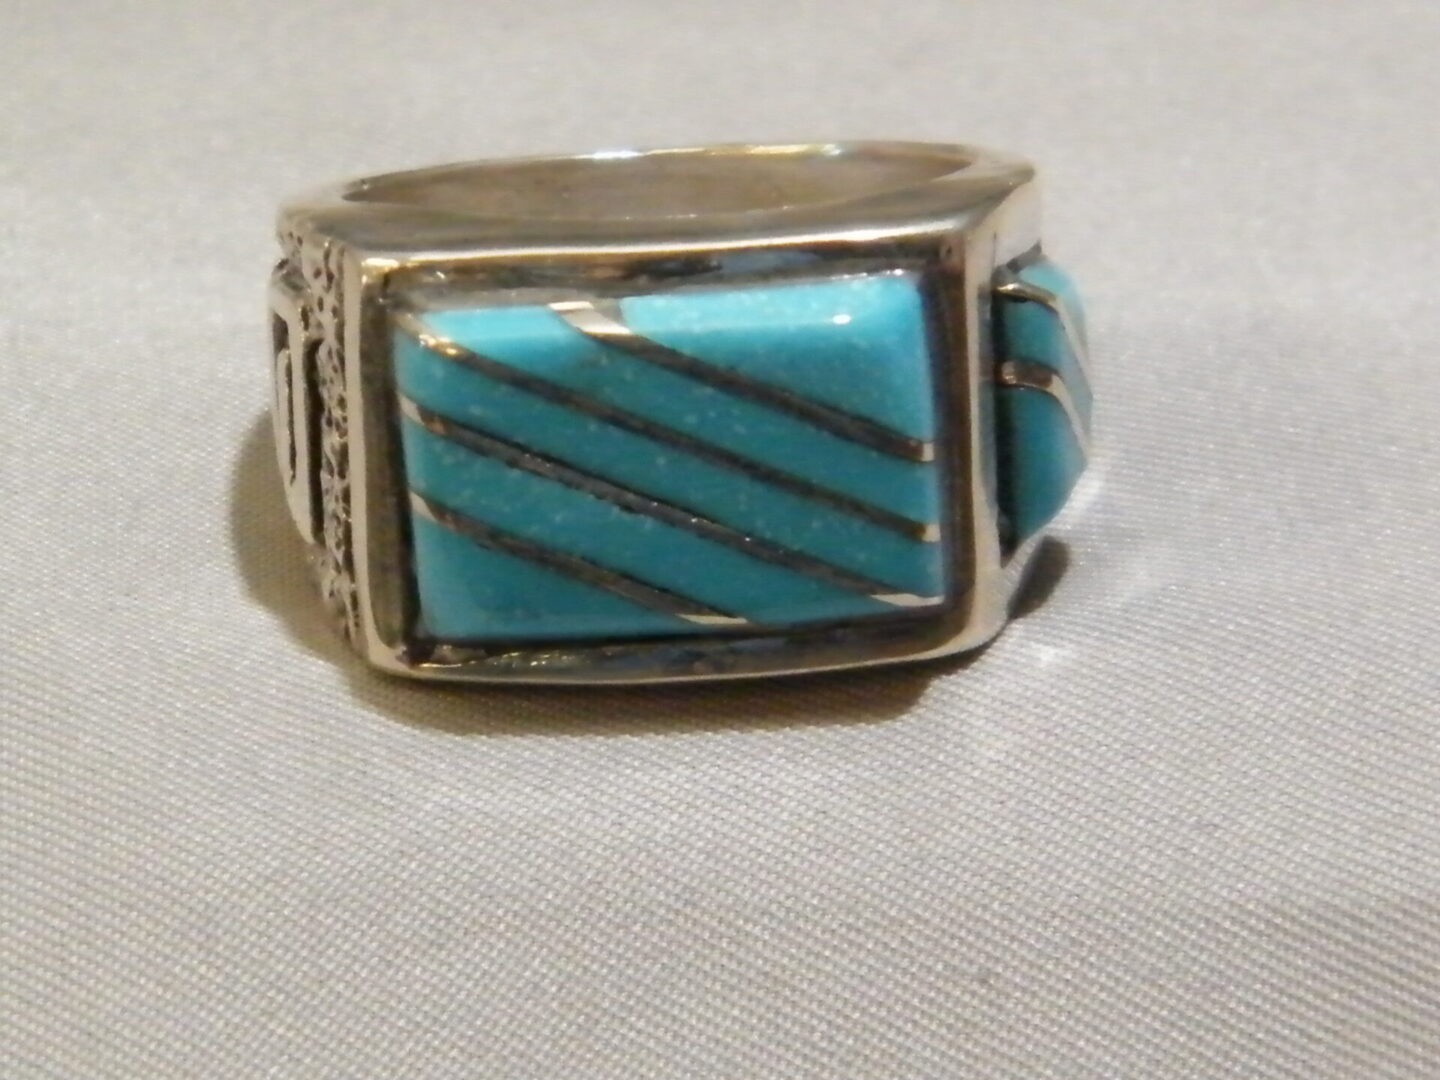 A Silver Color Ring With Blue and Silver Color Stone